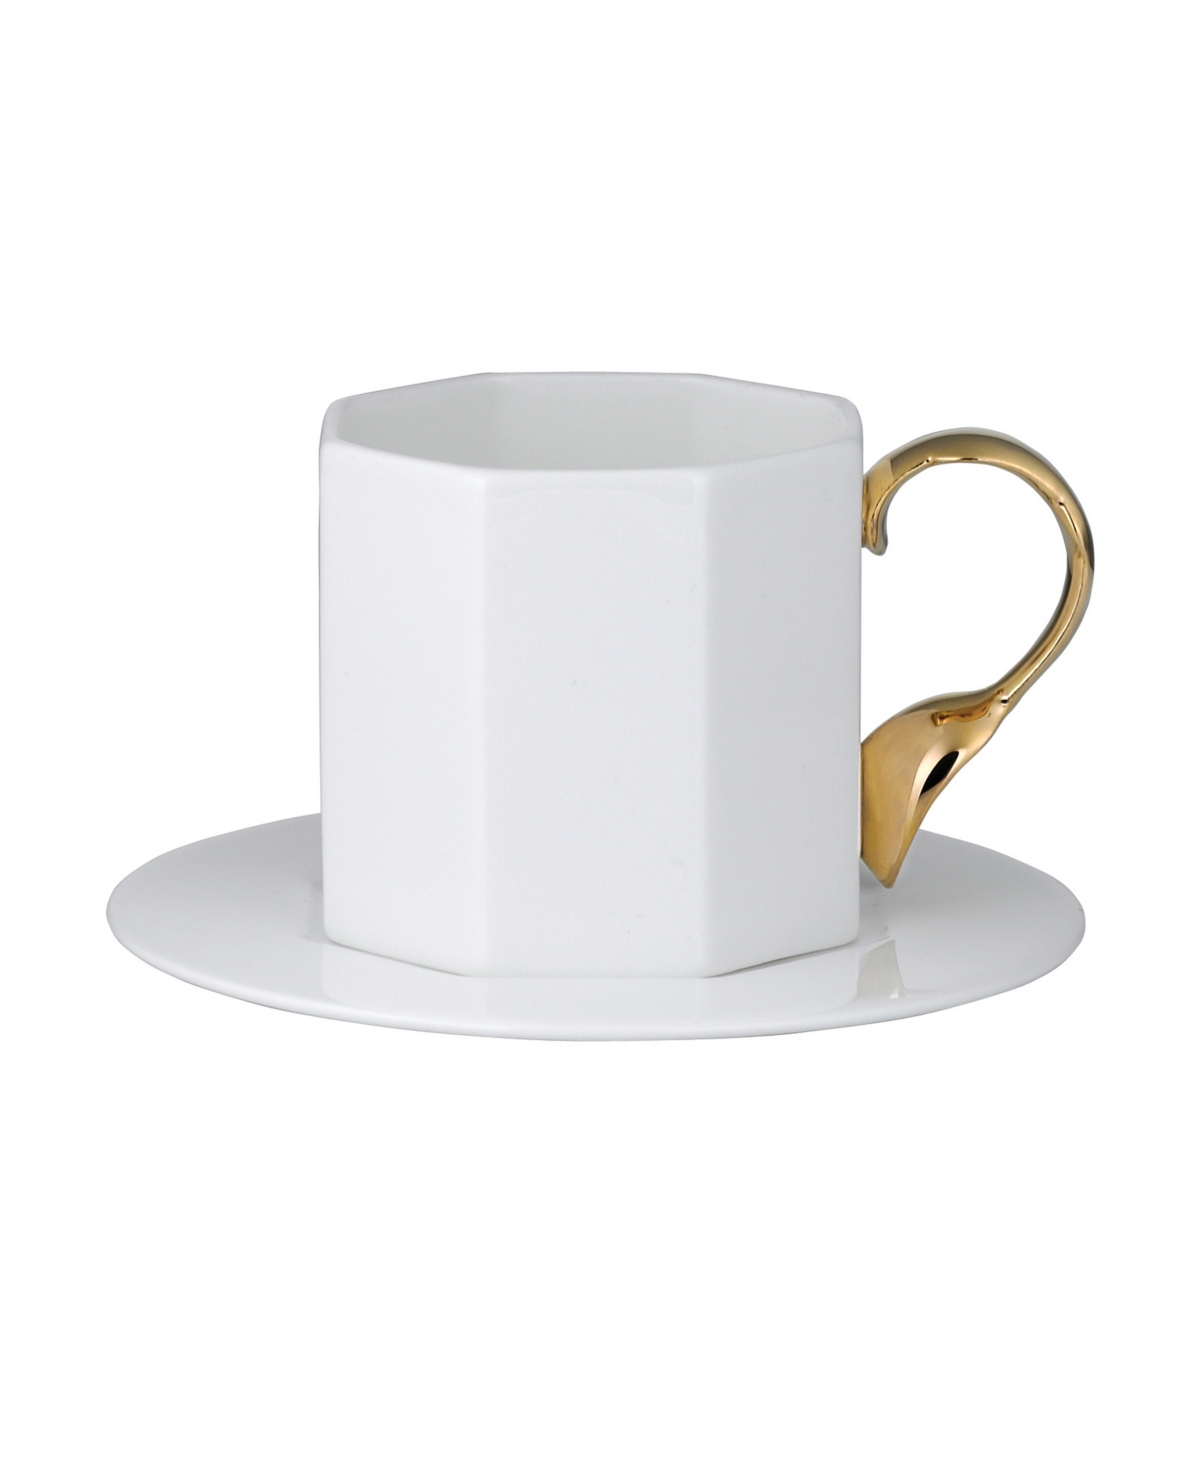 Twig New York Cutlery Cup Saucer In White